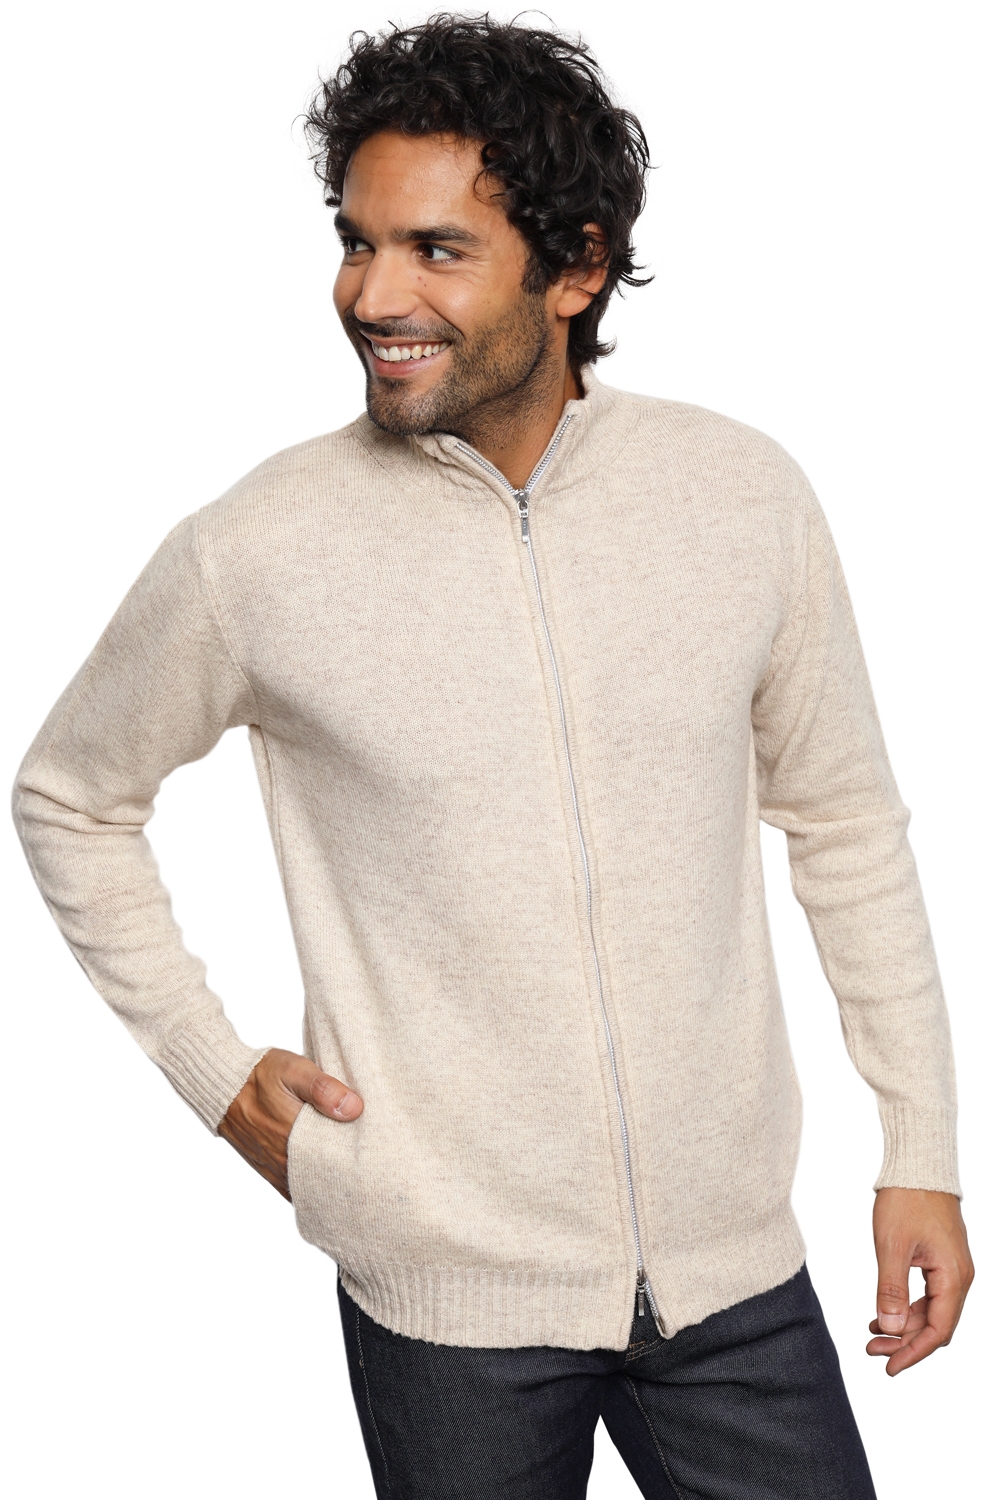 Chameau pull homme zip capuche clyde nature xs